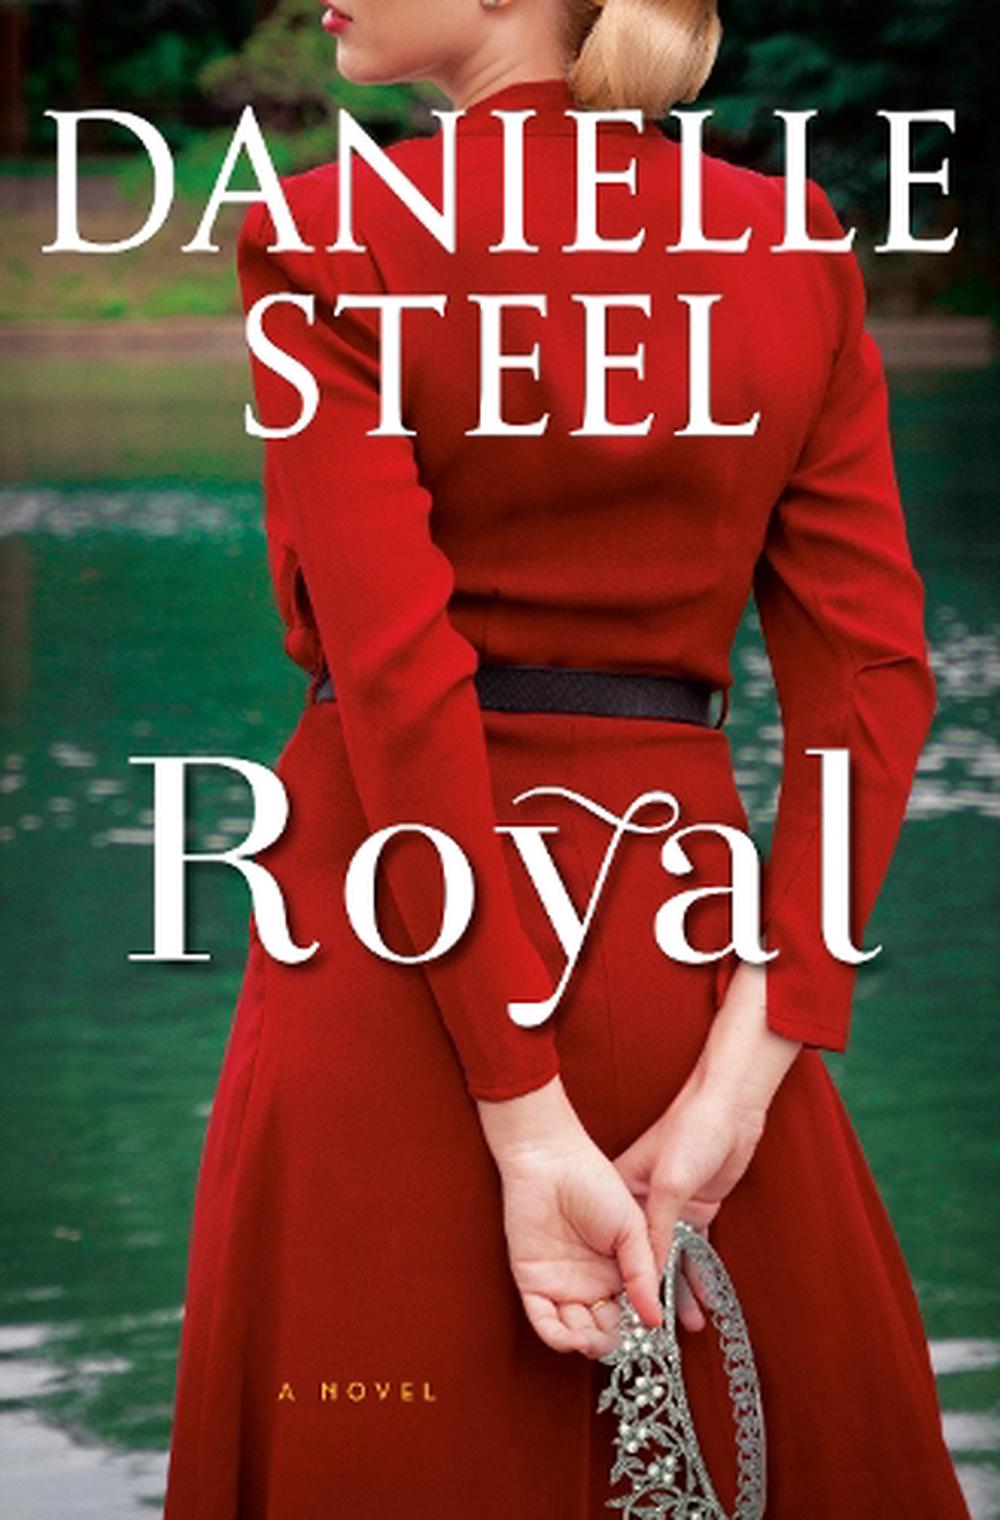 Royal : a Novel by Danielle Steel (English) Hardcover Book